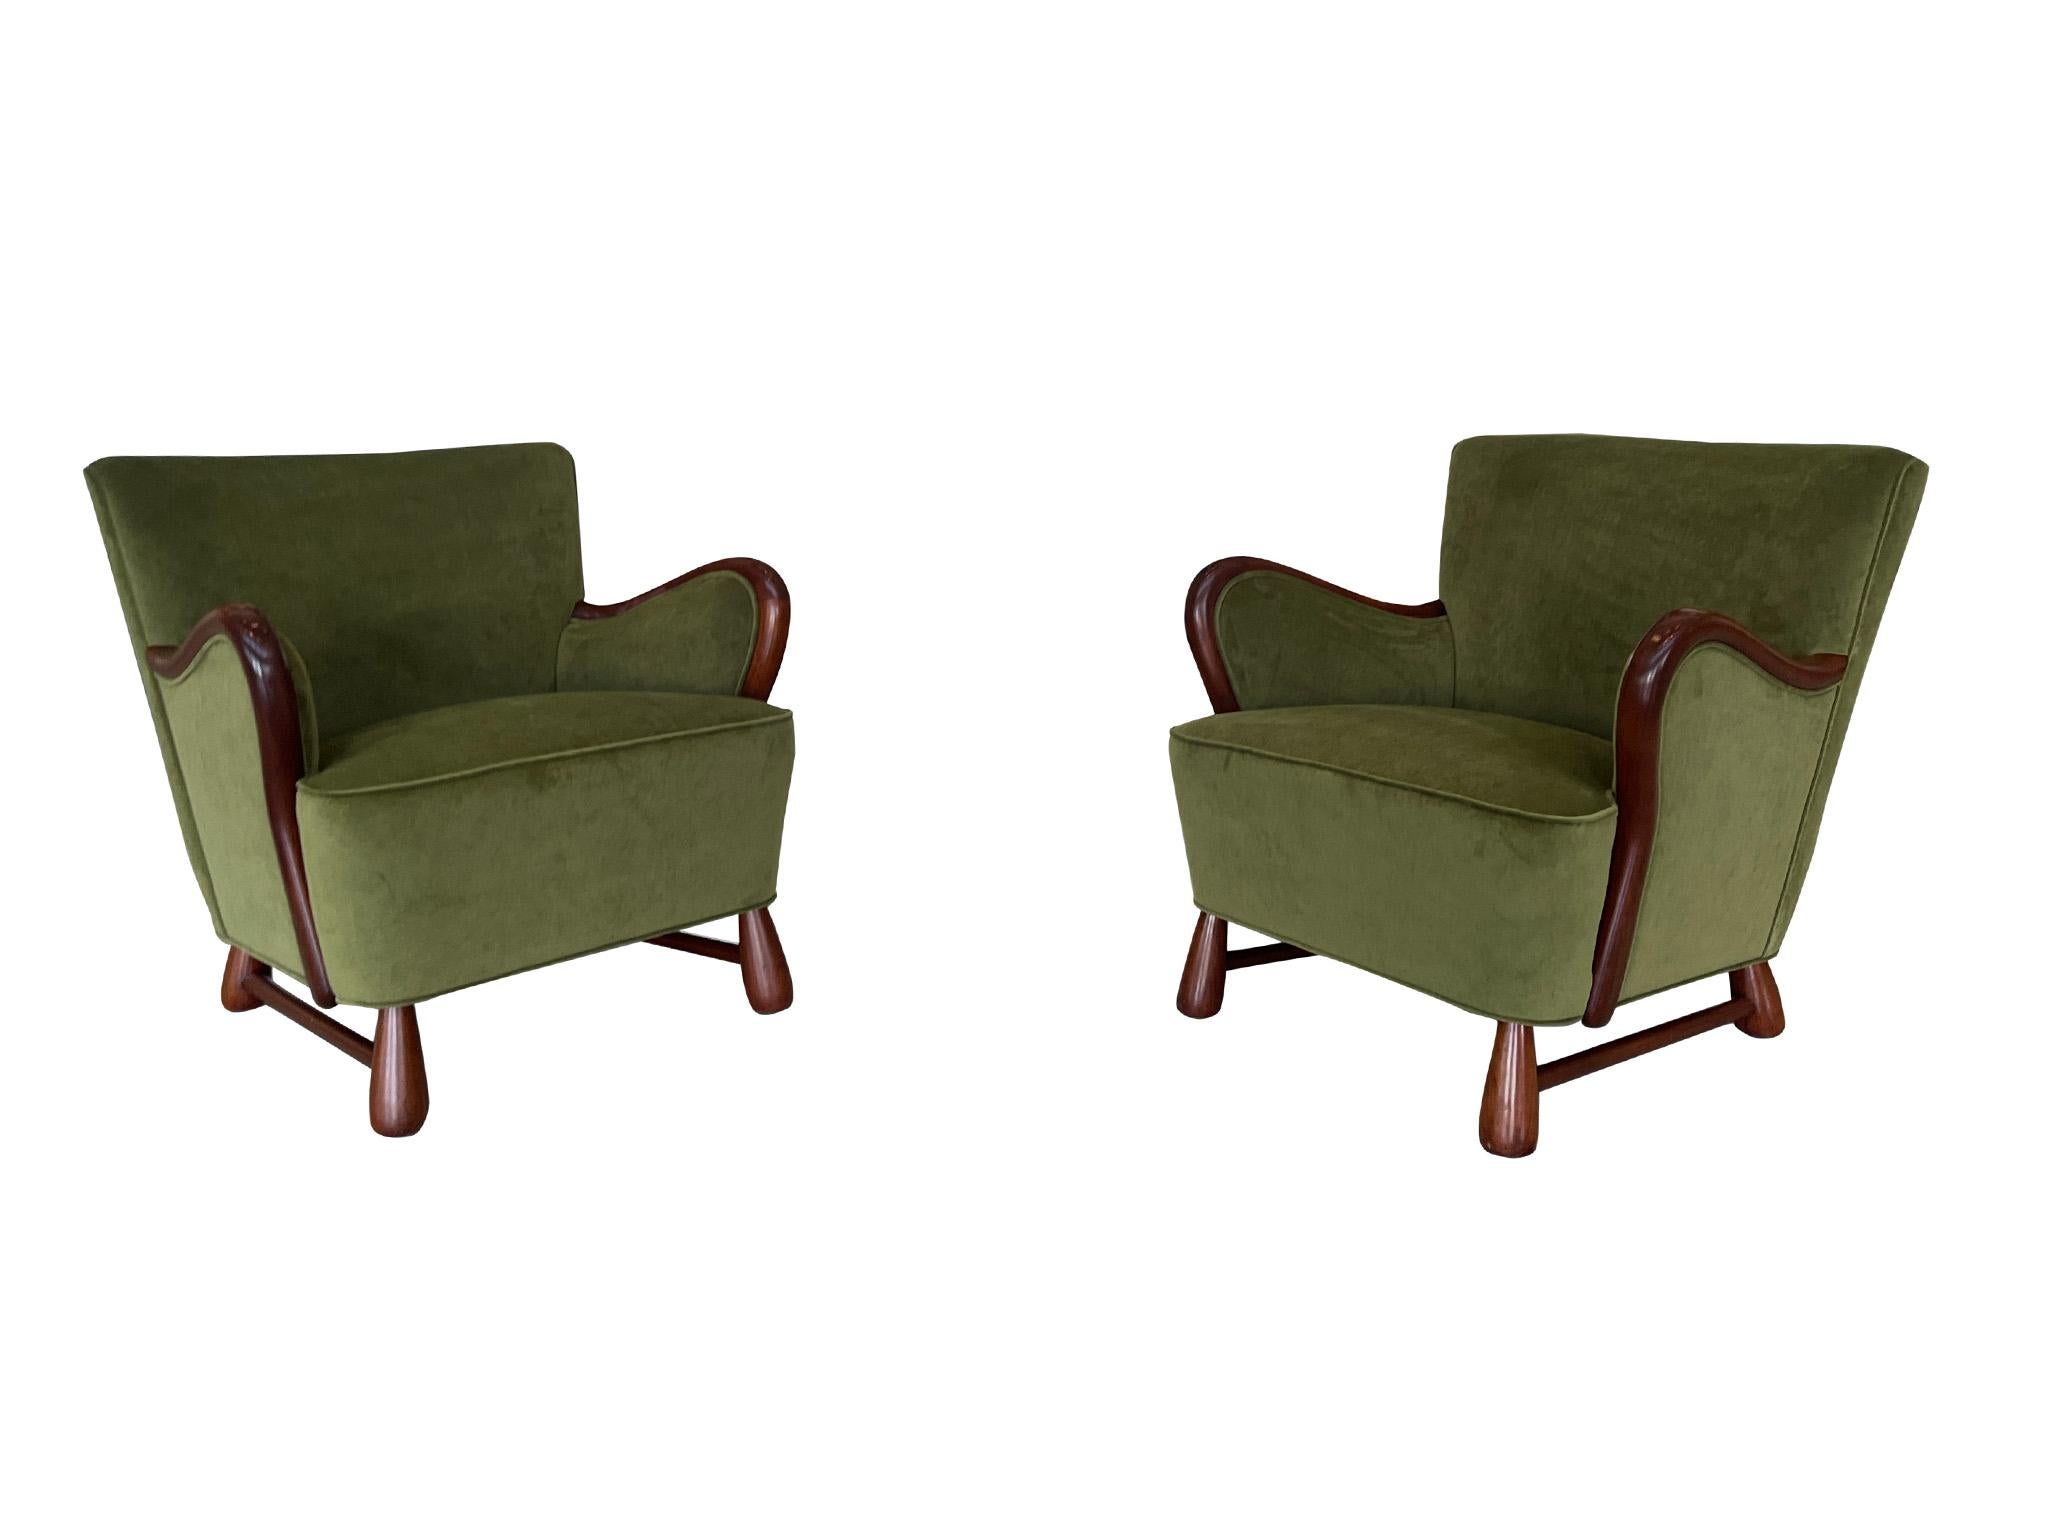 Wonderful and rare pair of 1940s Danish Art Deco Style Armchairs, attributed to cabinetmaker Otto Færge. Constructed in Mahogany and newly reupholstered in a luxurious mossy green velvet mohair, these chairs are a stunning example of high-quality